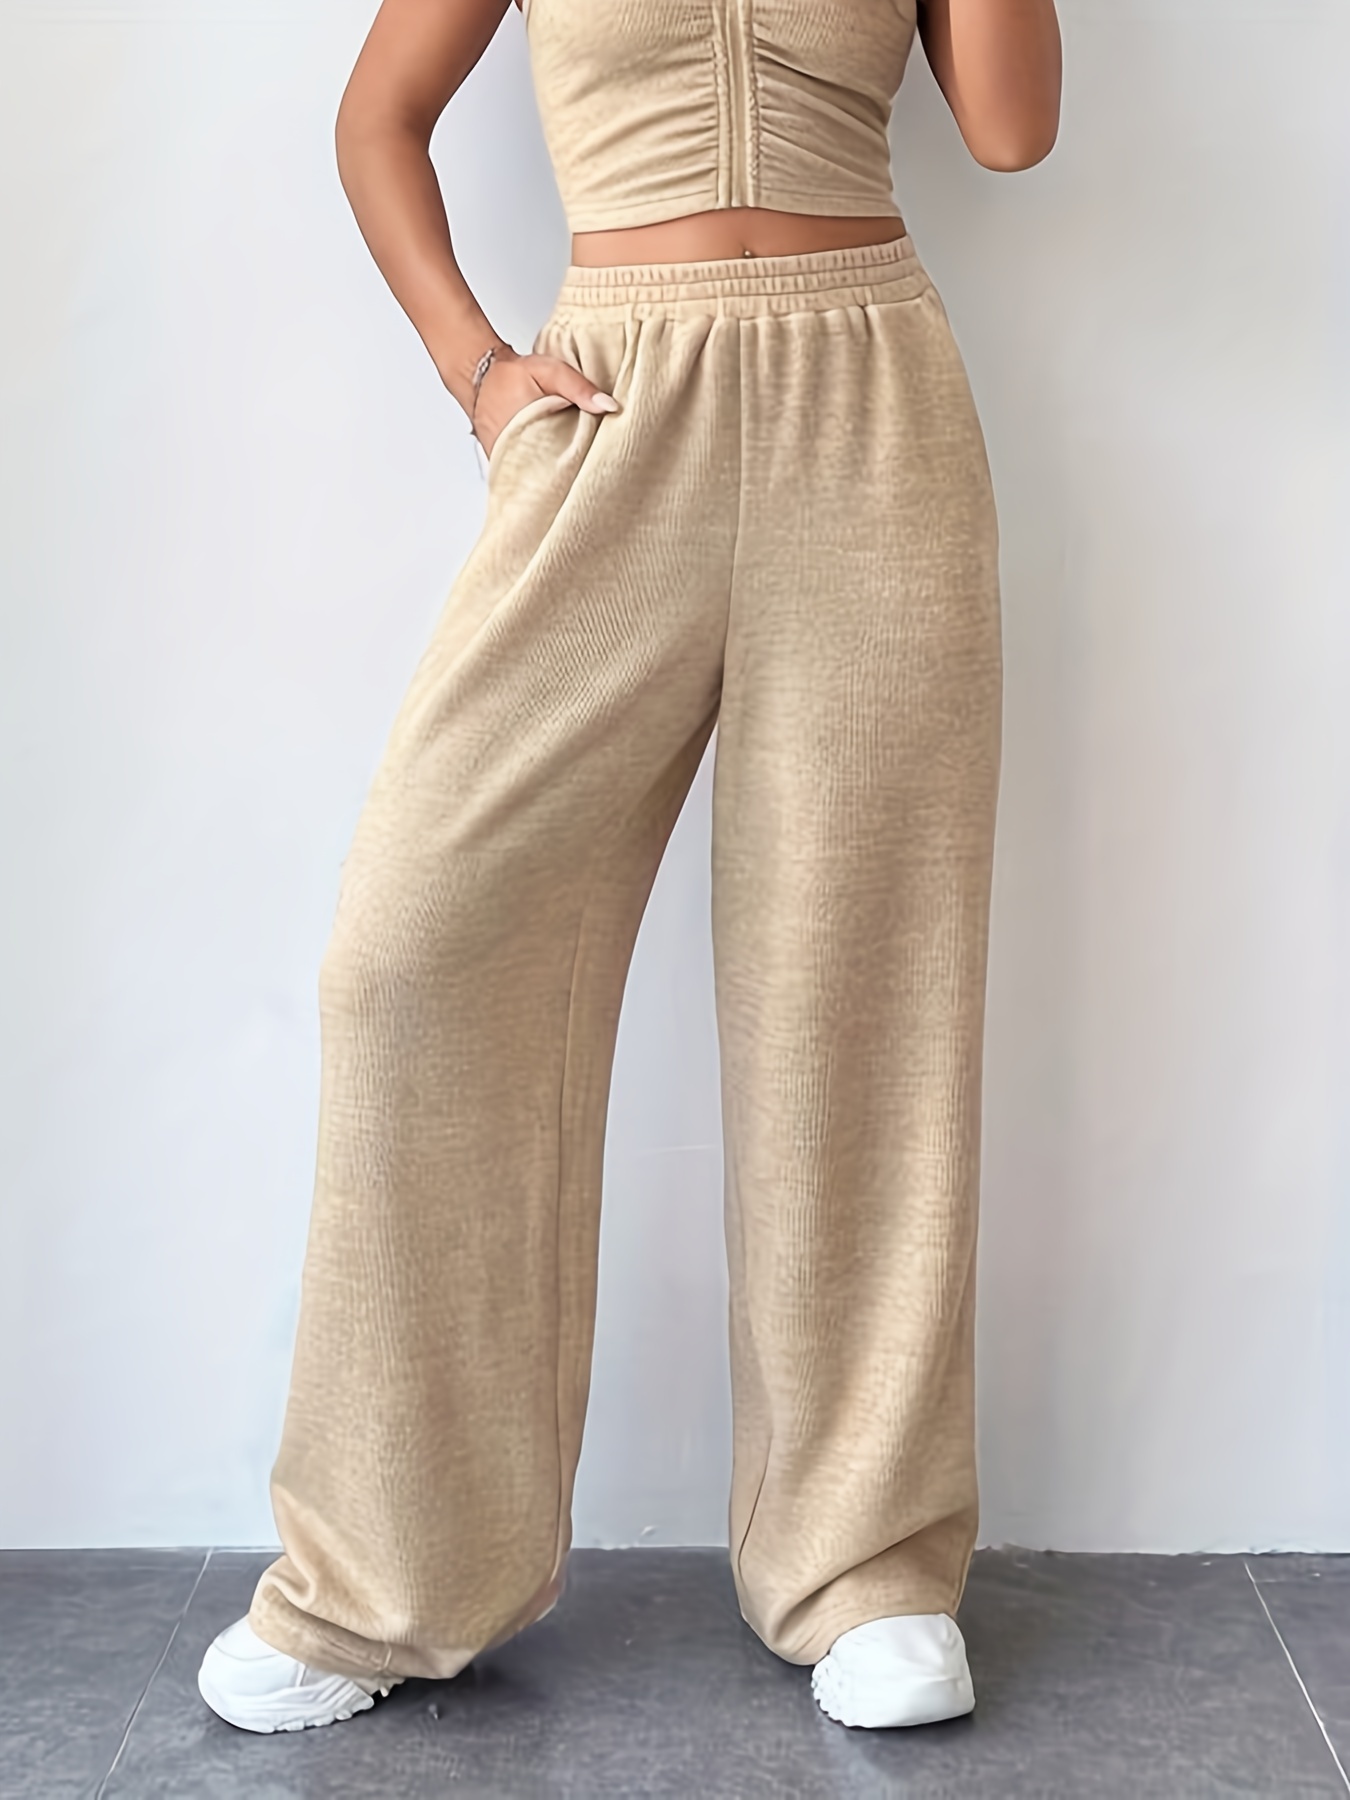 Comfortable Casual Sports Wide Leg Pants, Solid Color Elastic Waist Running  Pants, Women's Athleisure